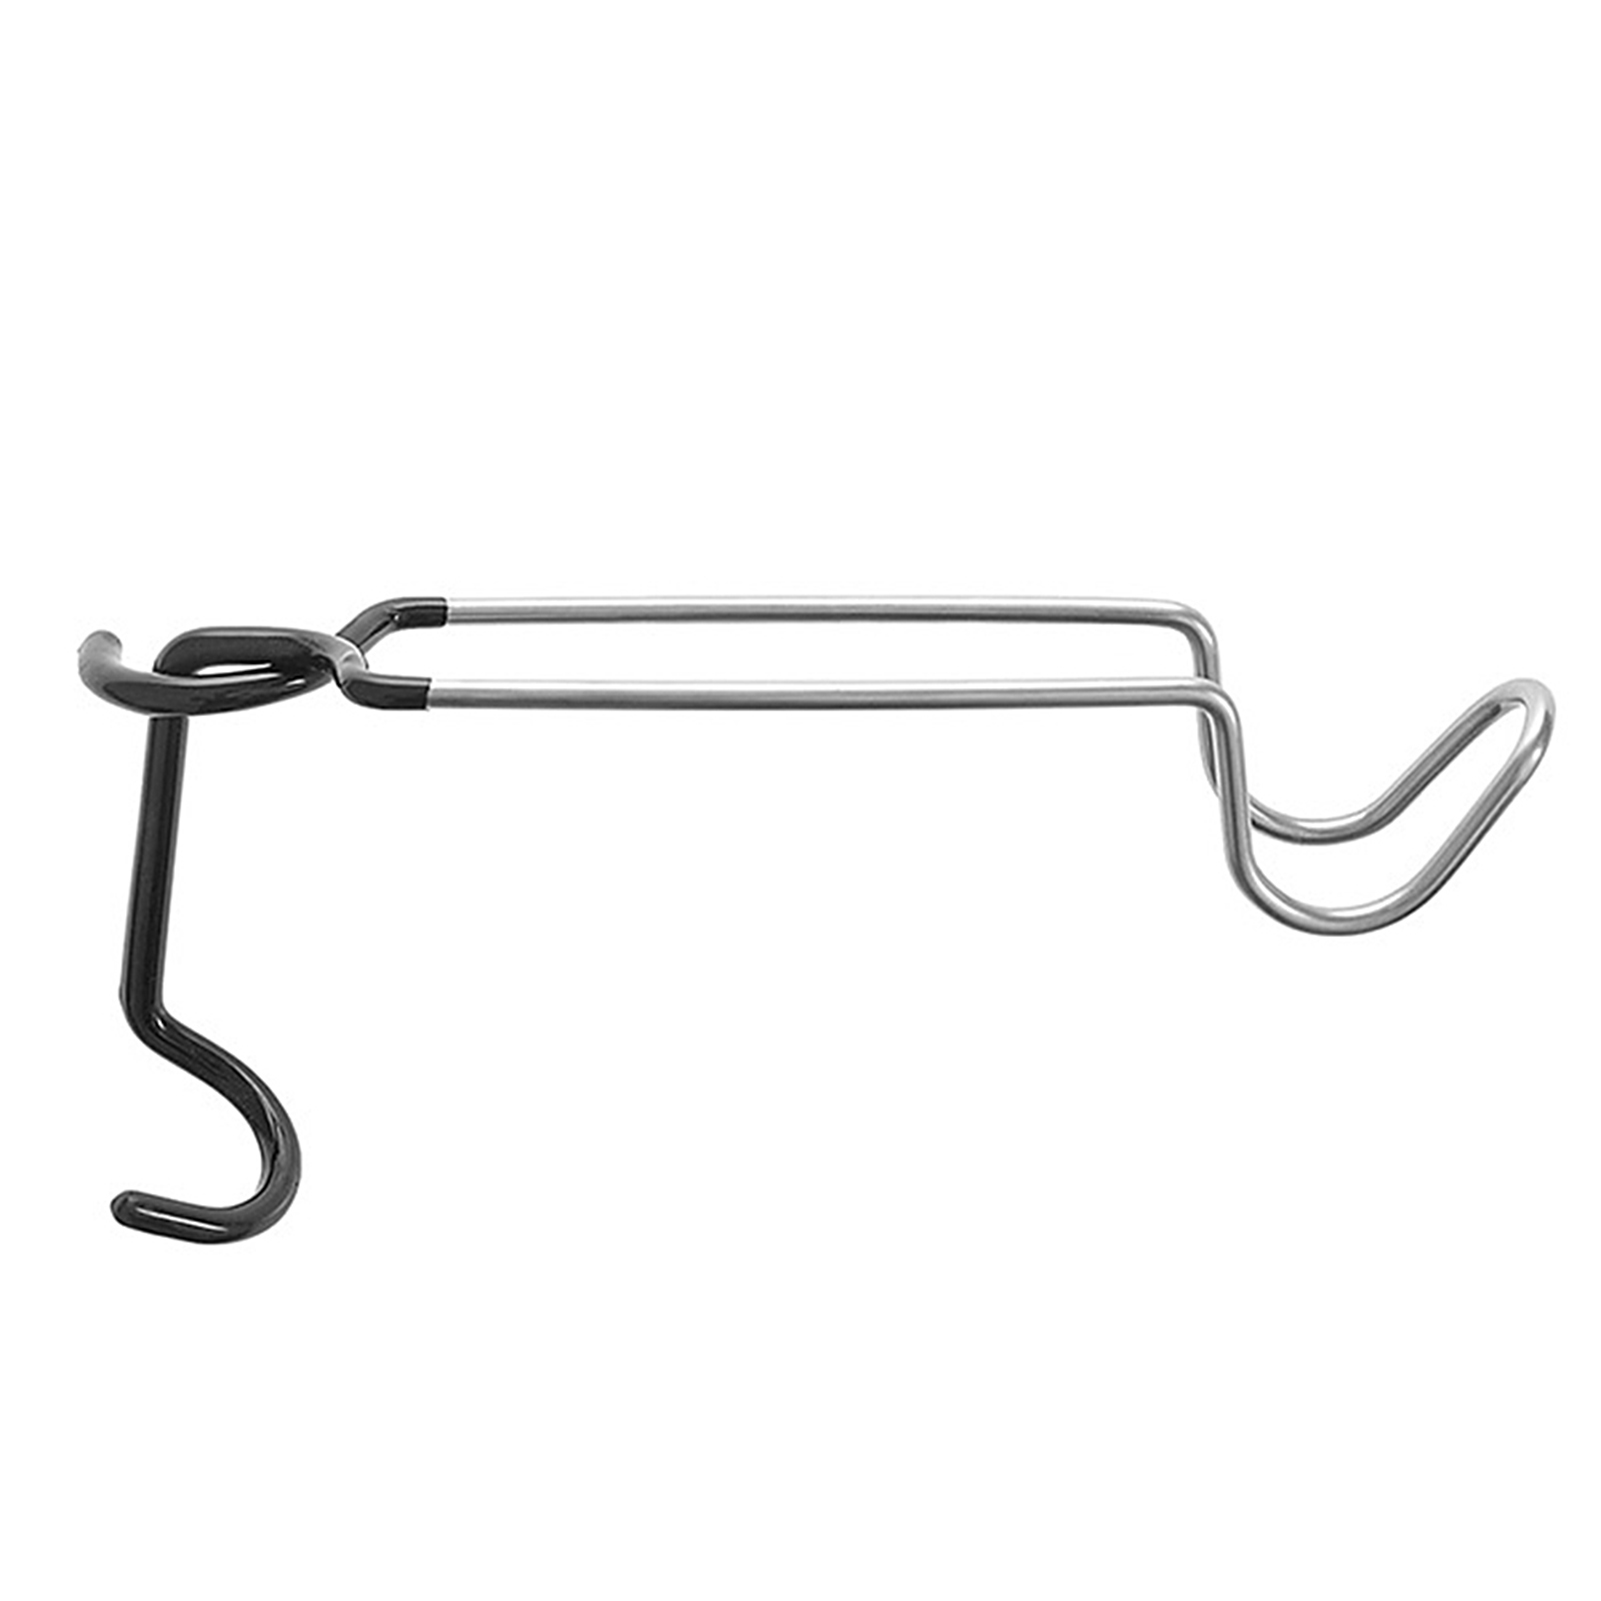 Andoer Stainless Steel Camping Hook Portable  Camping Equipment Tent Lamp Hanger for Camping Travelling Adventure - image 1 of 7